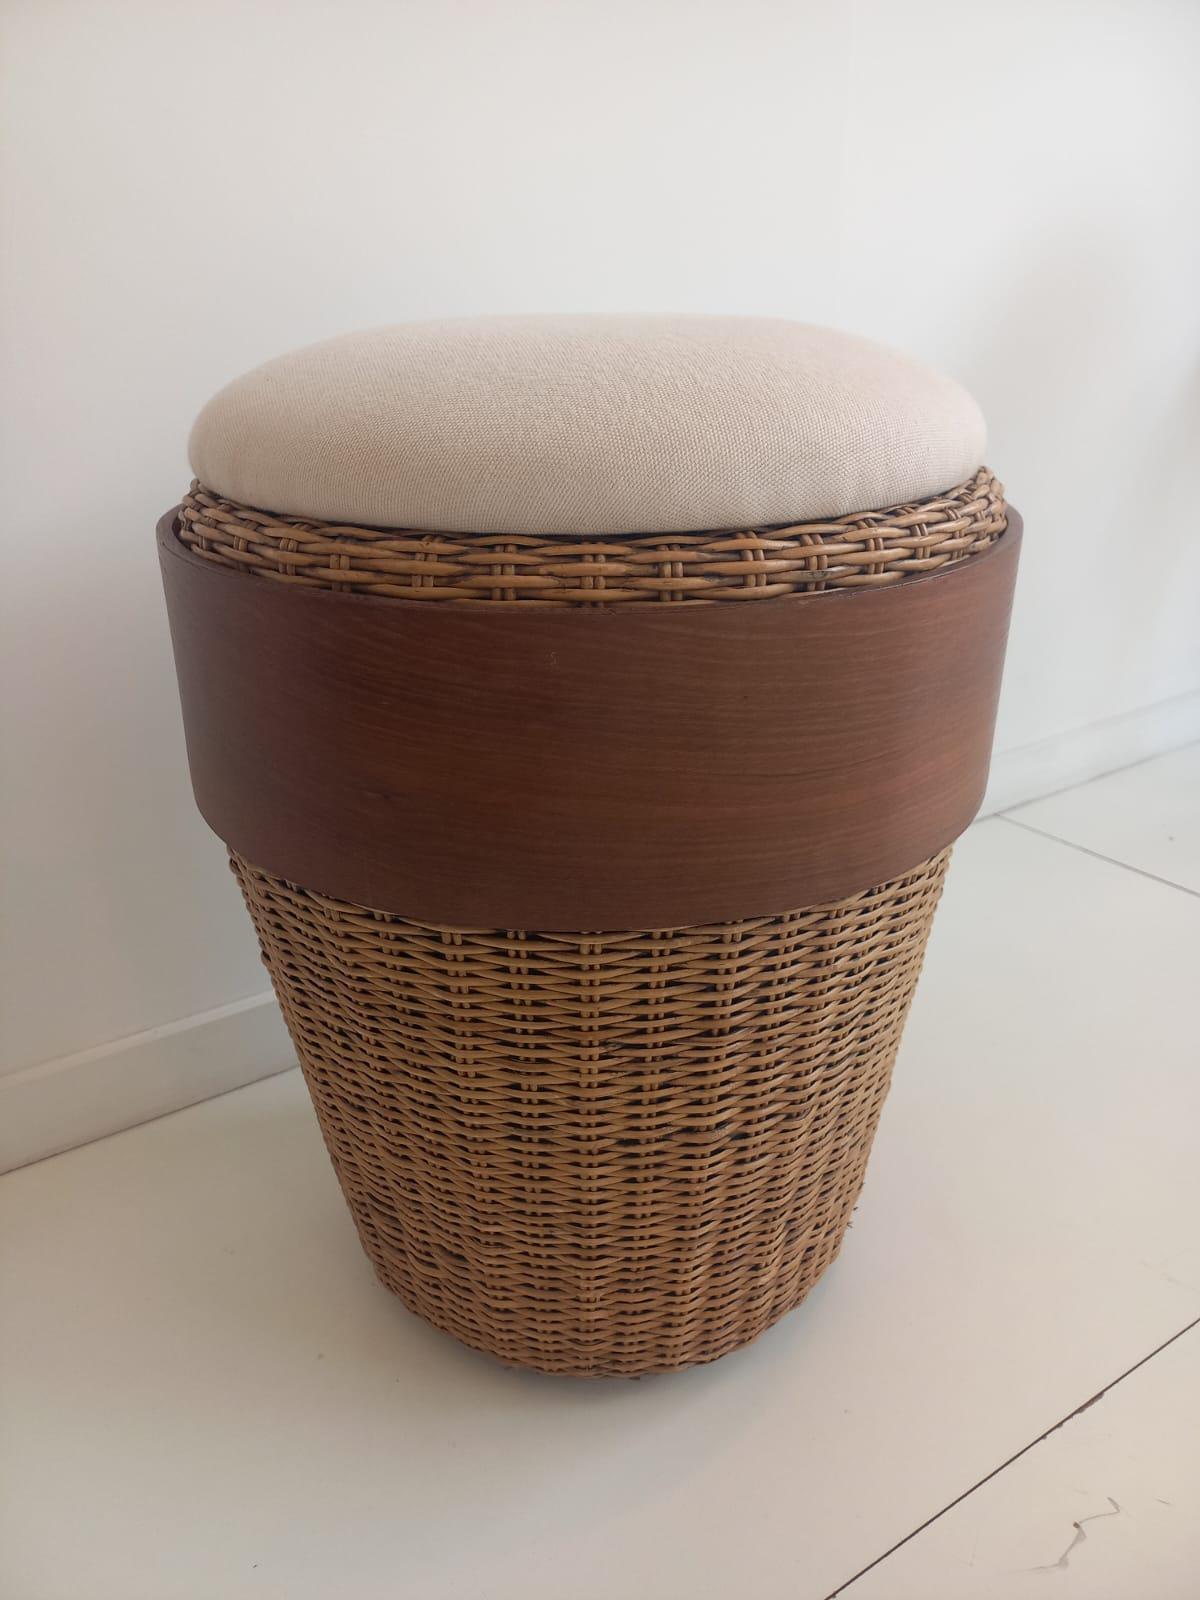 Ancestral culture and indigenous customs are expressed in Ianomâmi stool. The rope's handcrafted weave rescues the face paintings used by tribal groups as unique marks of belonging, rites and celebrations. The stainless steel structure and the